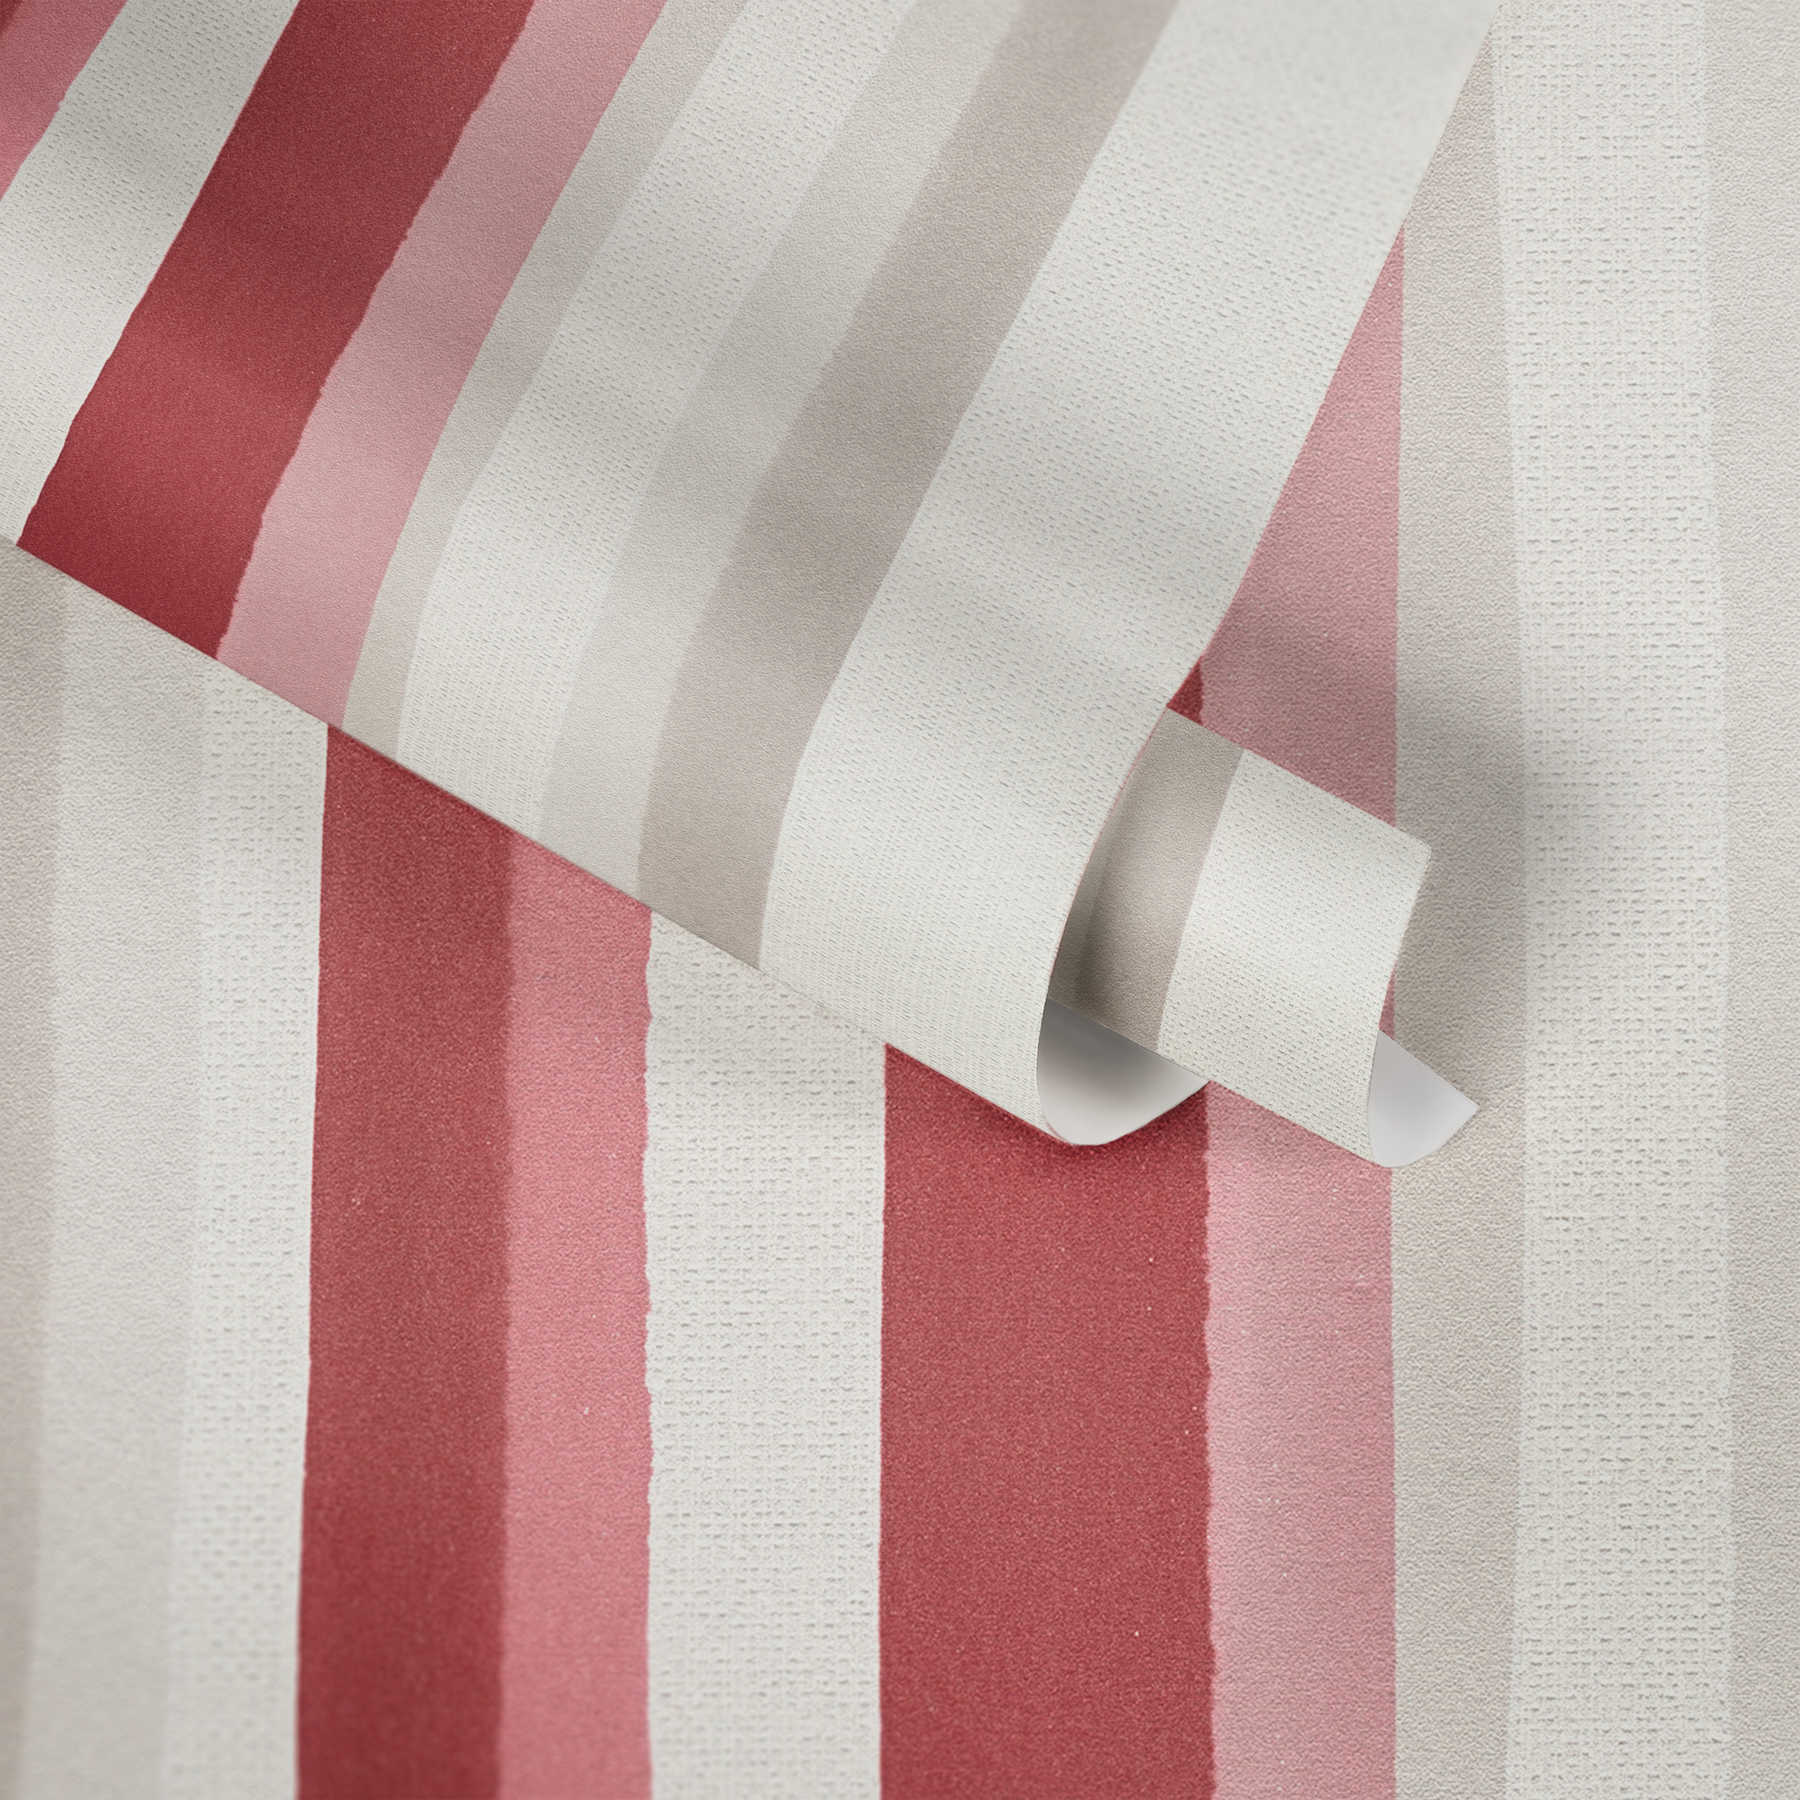             Non-woven wallpaper striped with colourful lines - beige, red
        